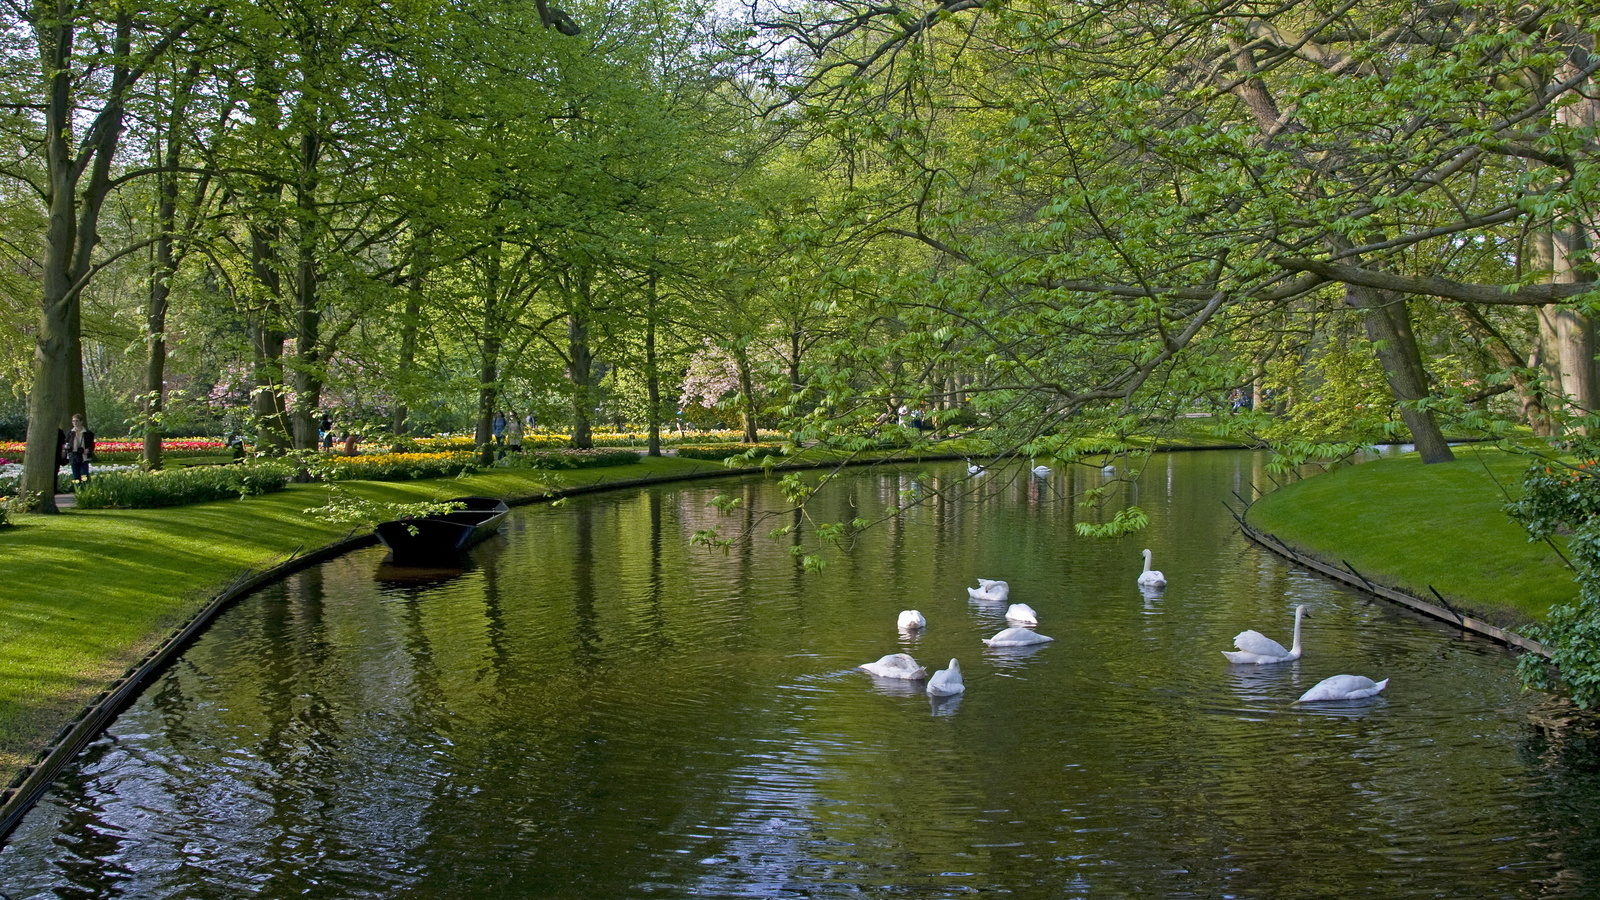 boats, rivers, swans, animals, landscape, birds, trees, green